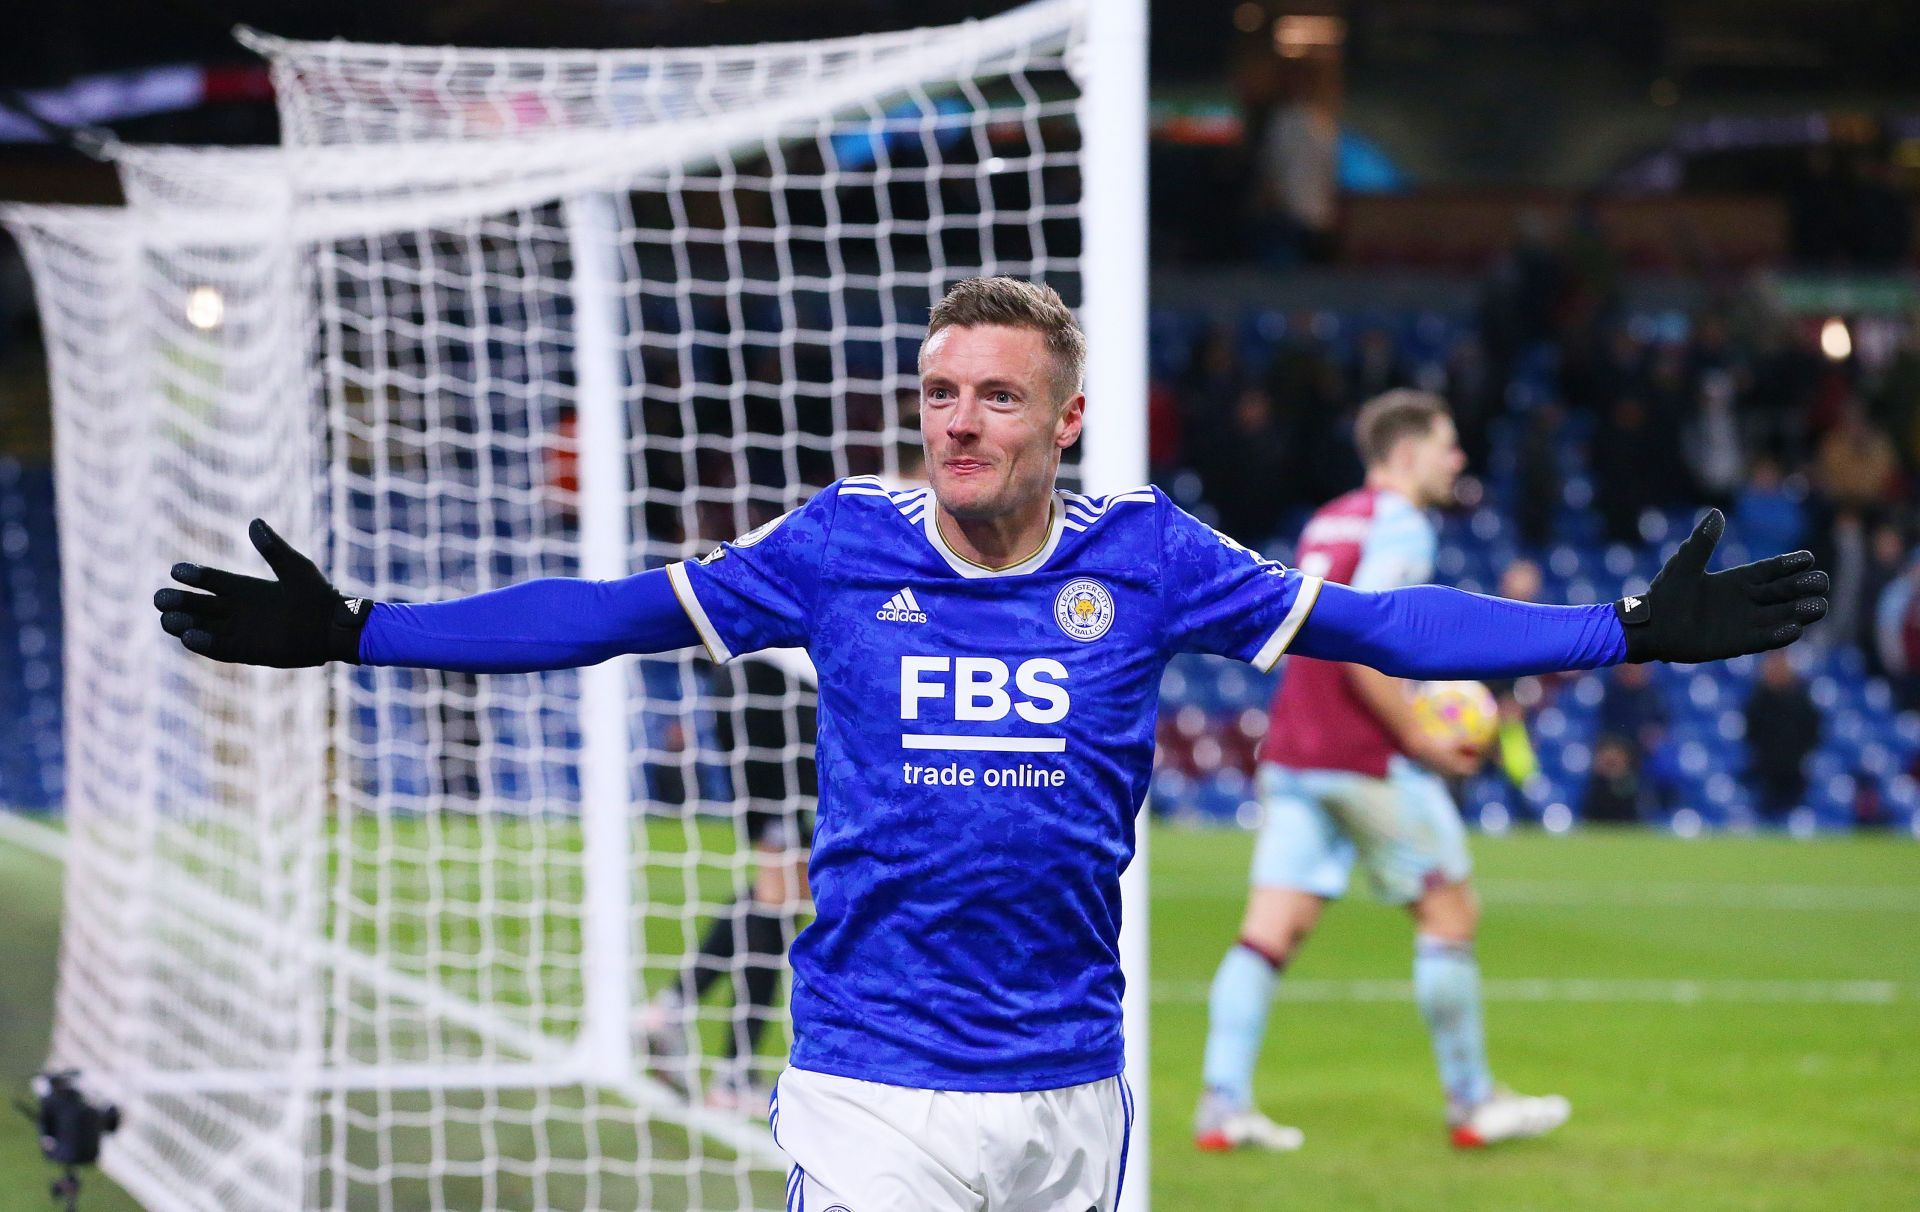 Jamie Vardy was back among the goals for Leicester City on his return from injury.